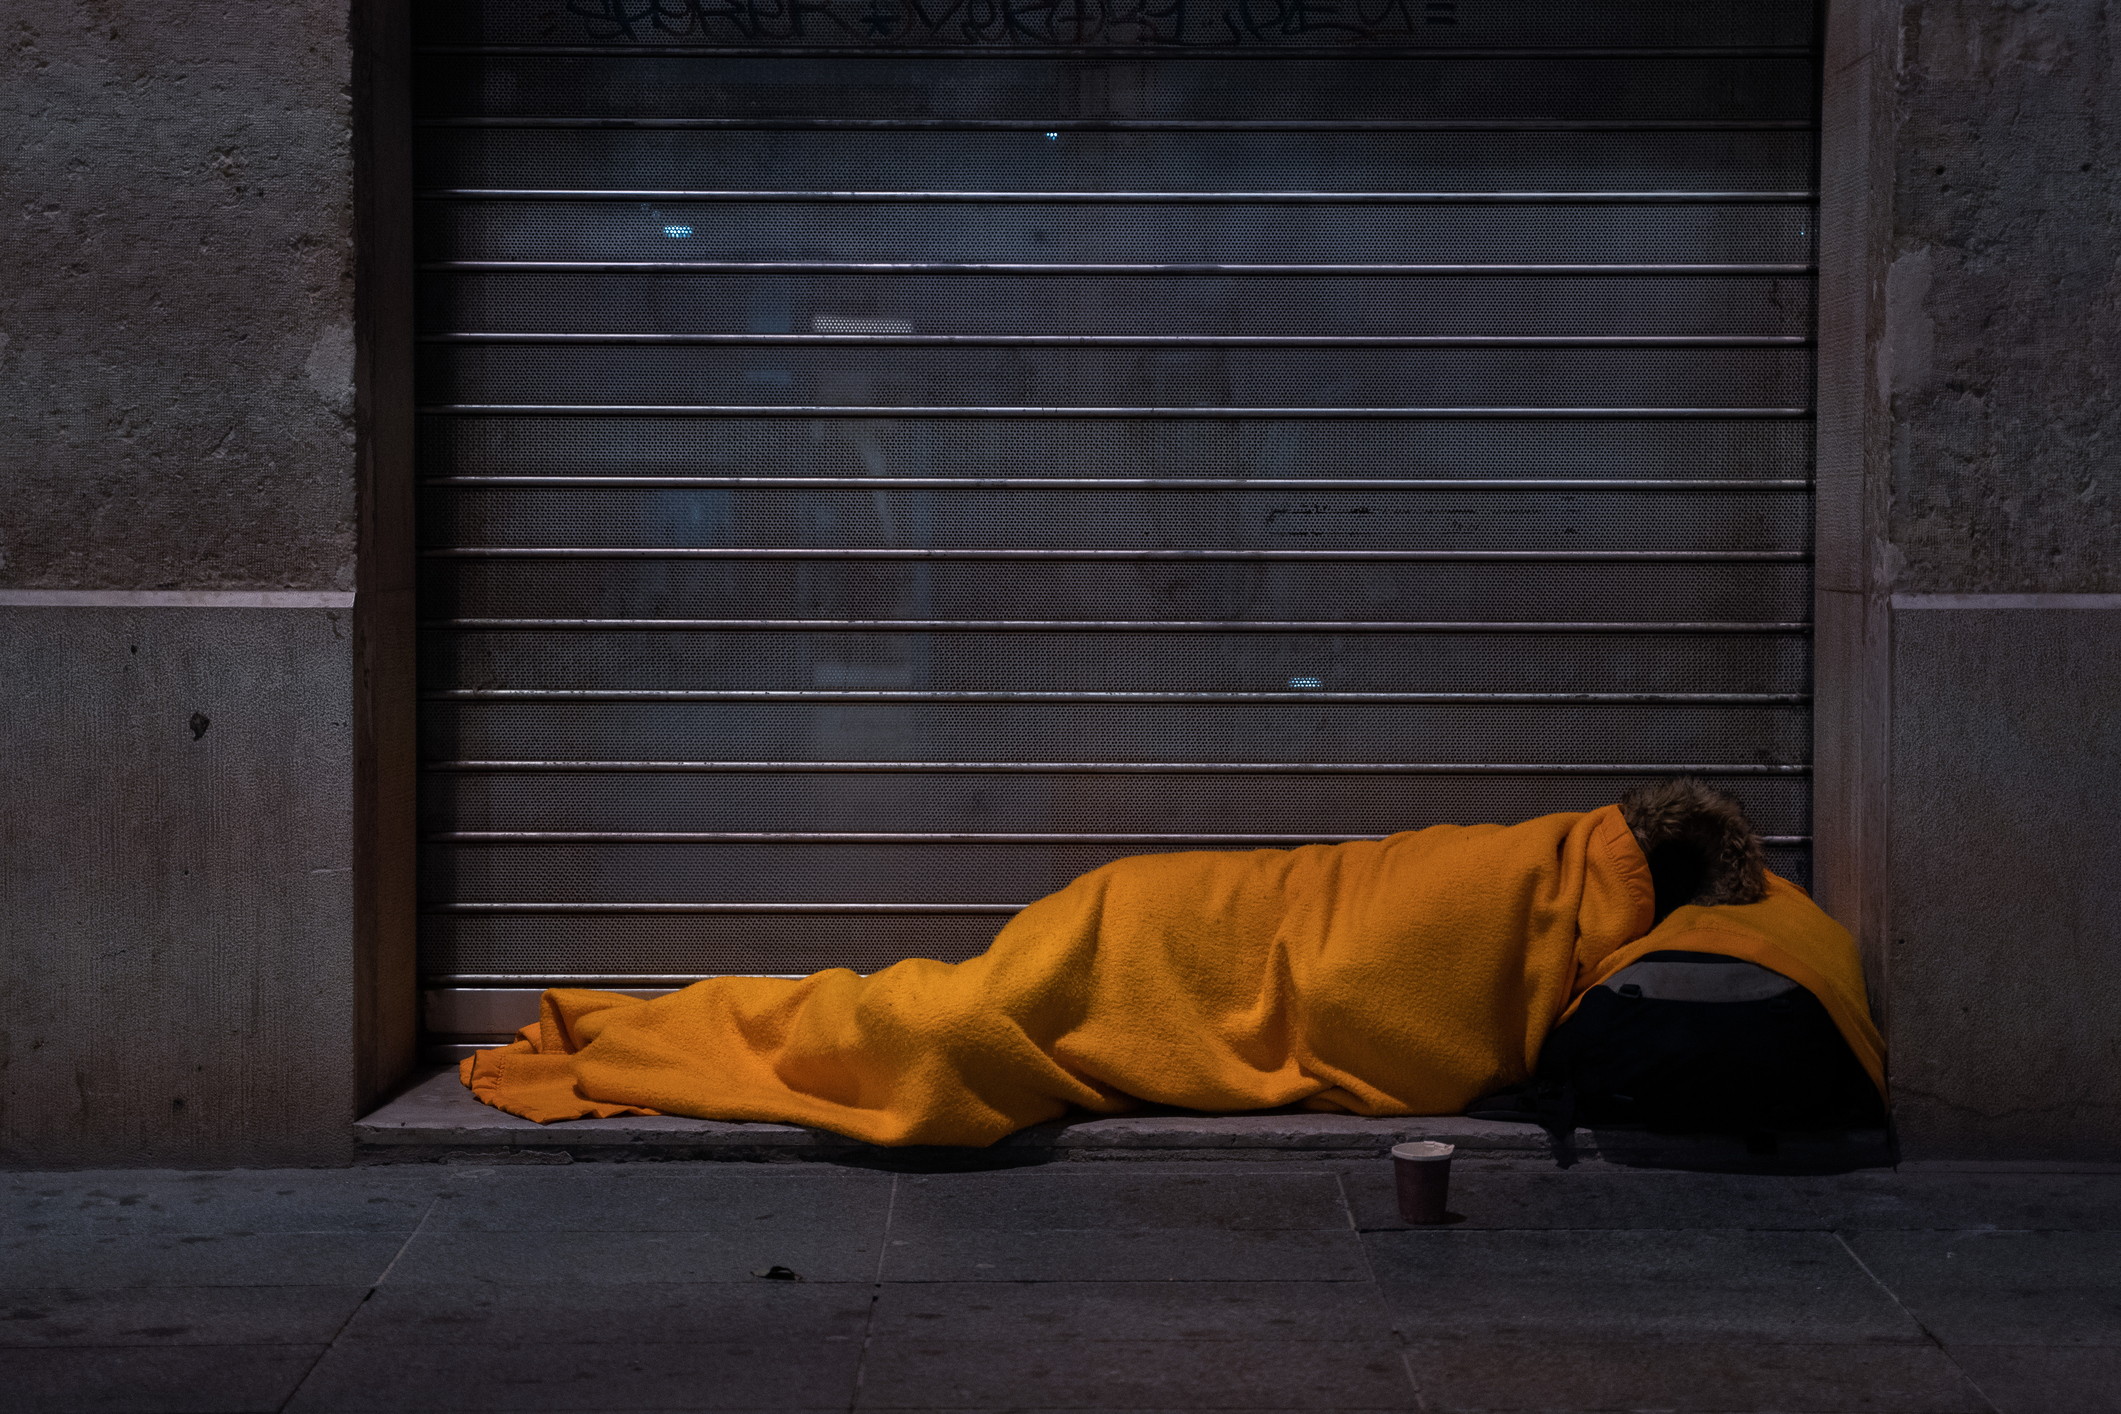 A homeless person sleeps on the street under a blanket in front of a storefront.